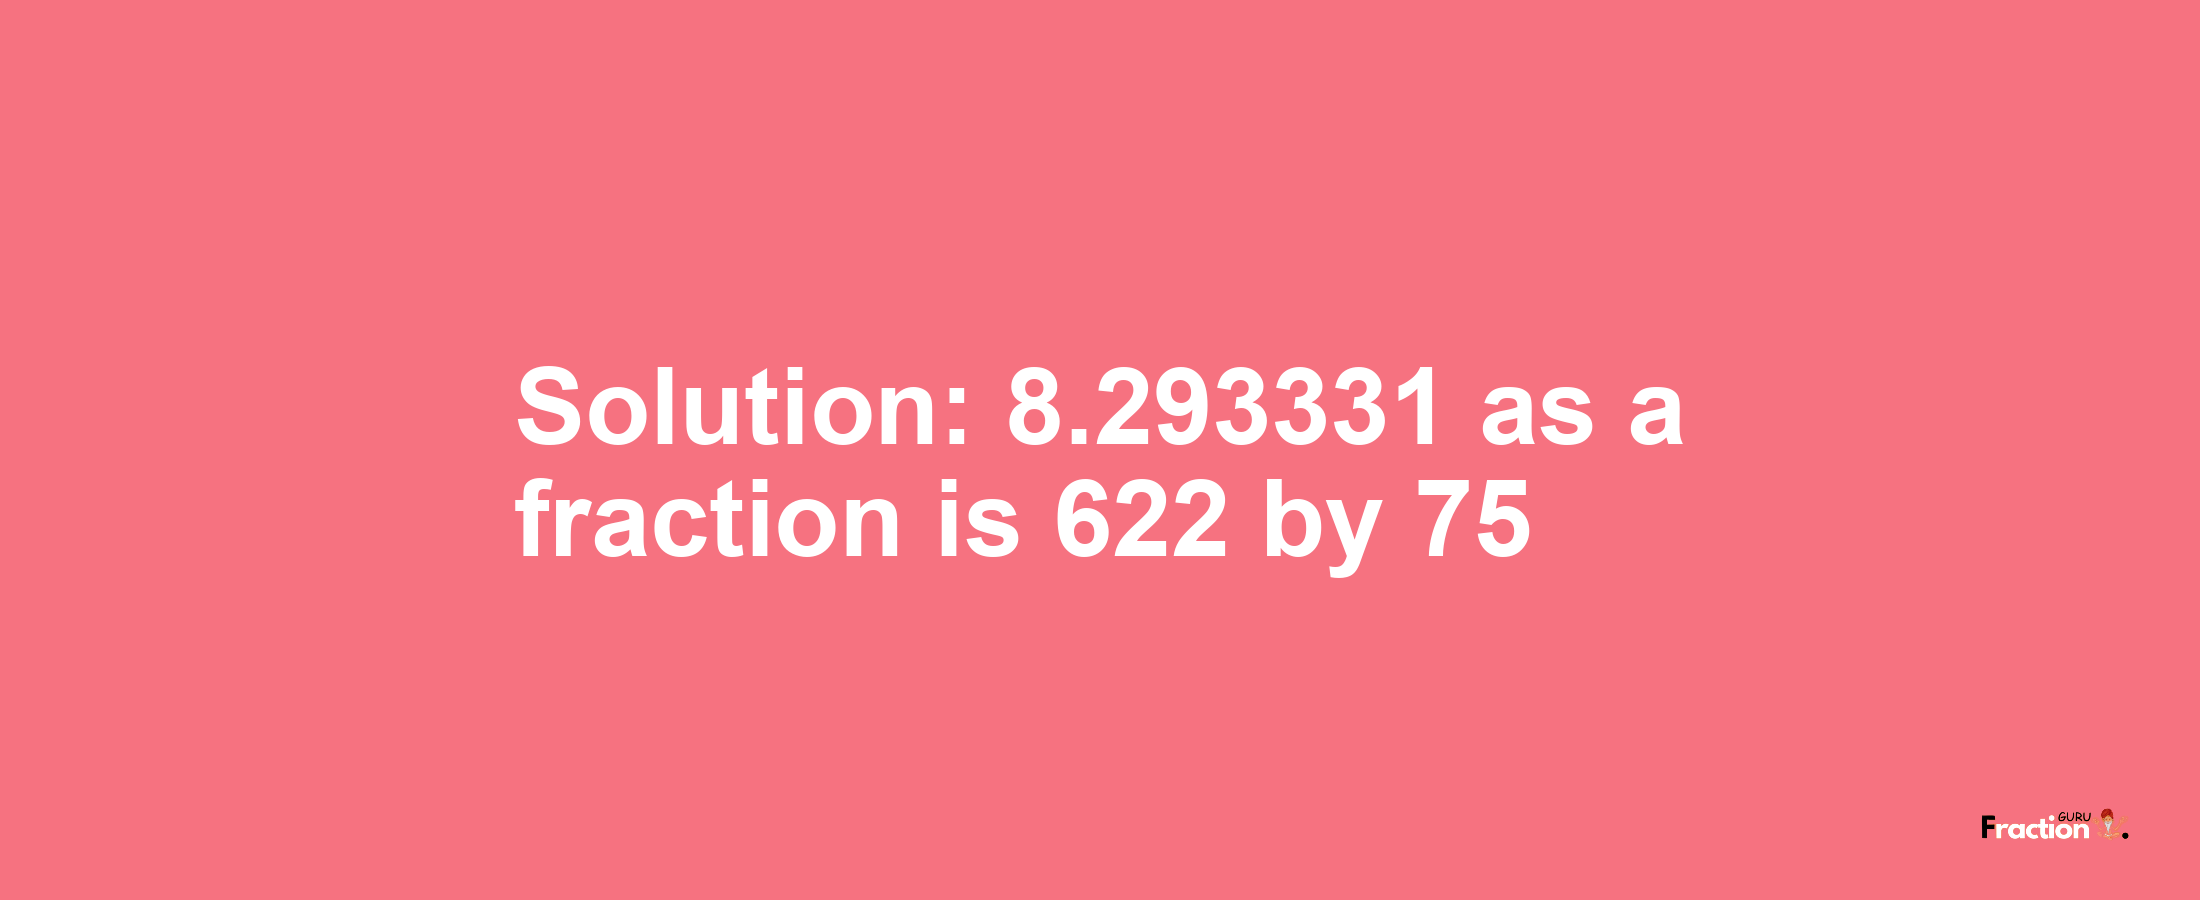 Solution:8.293331 as a fraction is 622/75